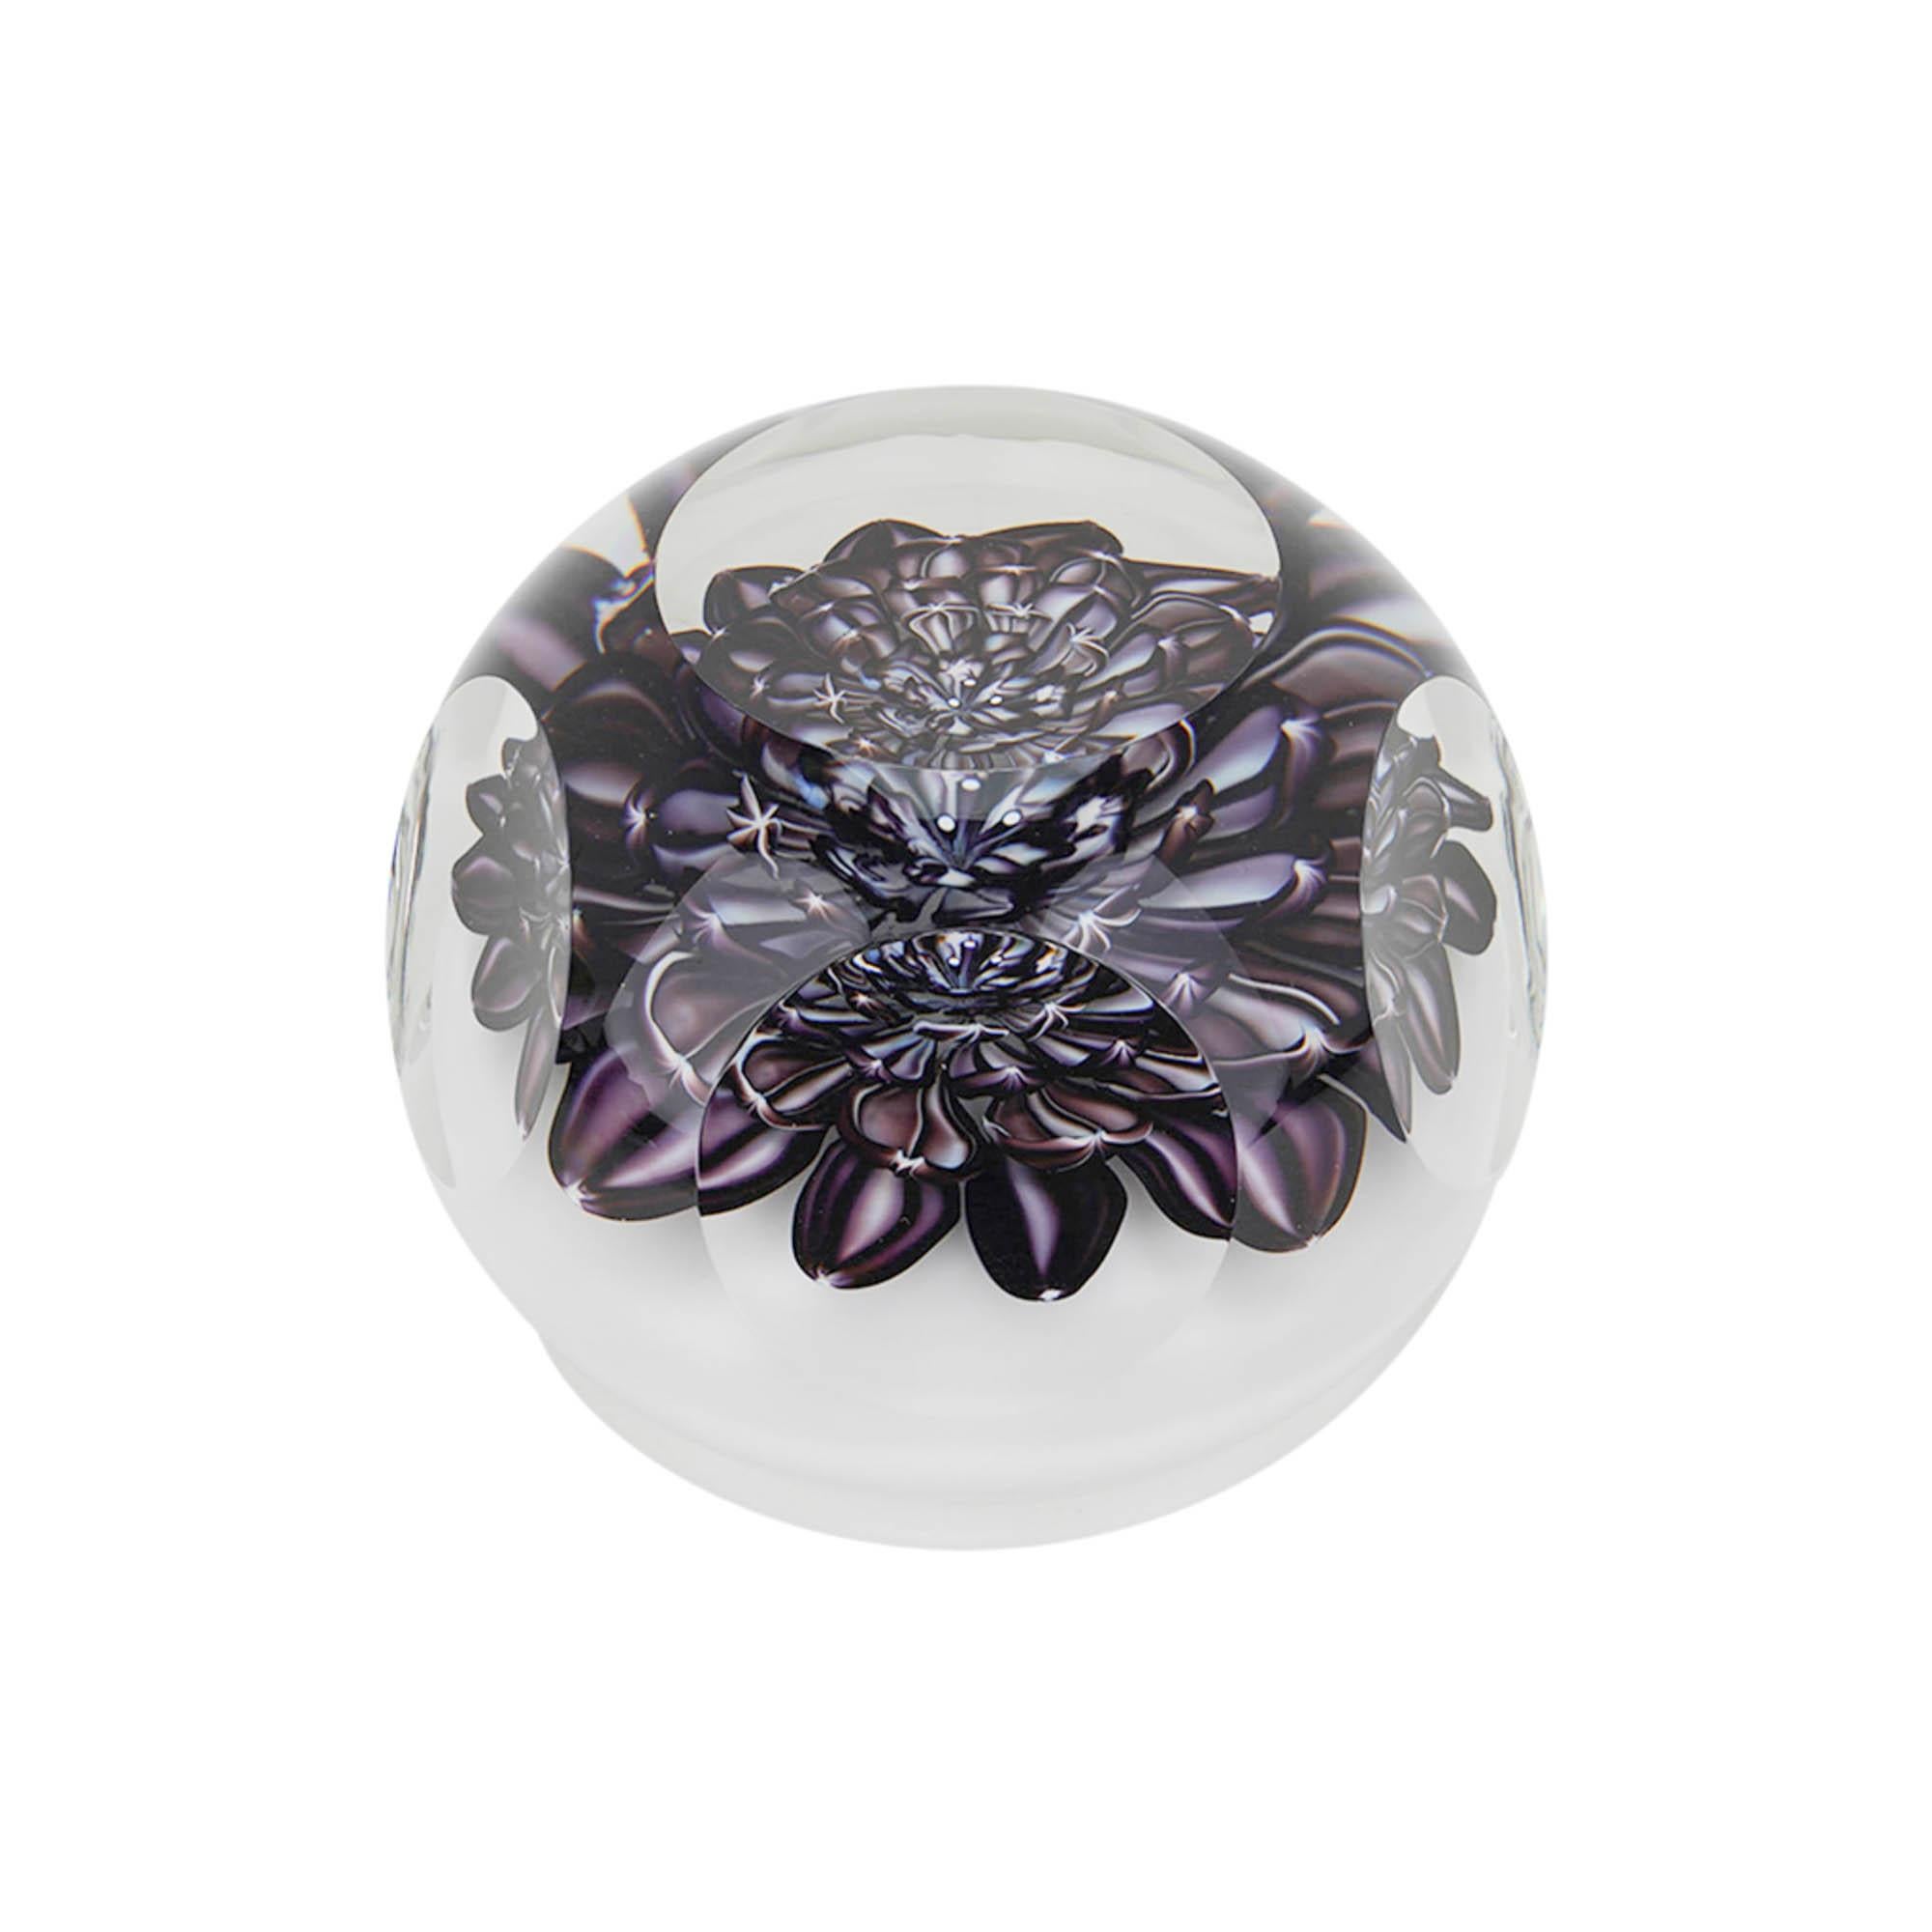 Hermes St. Louis Paperweight Dahlia Noir 2015 Limited Edition In New Condition For Sale In Miami, FL